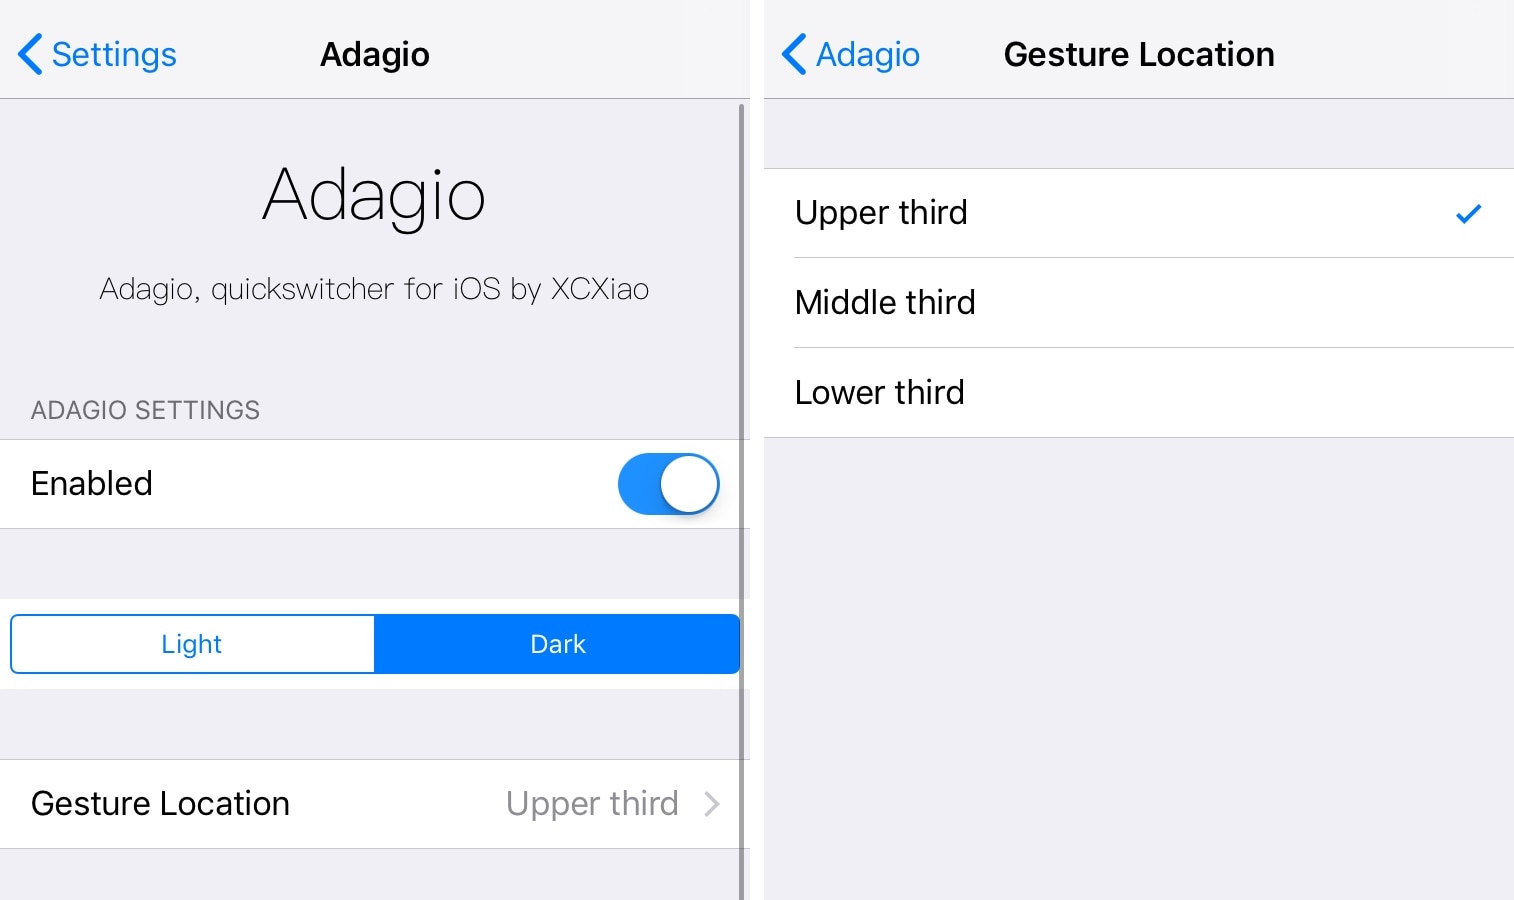 Adagio is a Modernized Quick Switcher for Jailbroken iOS 11 Devices